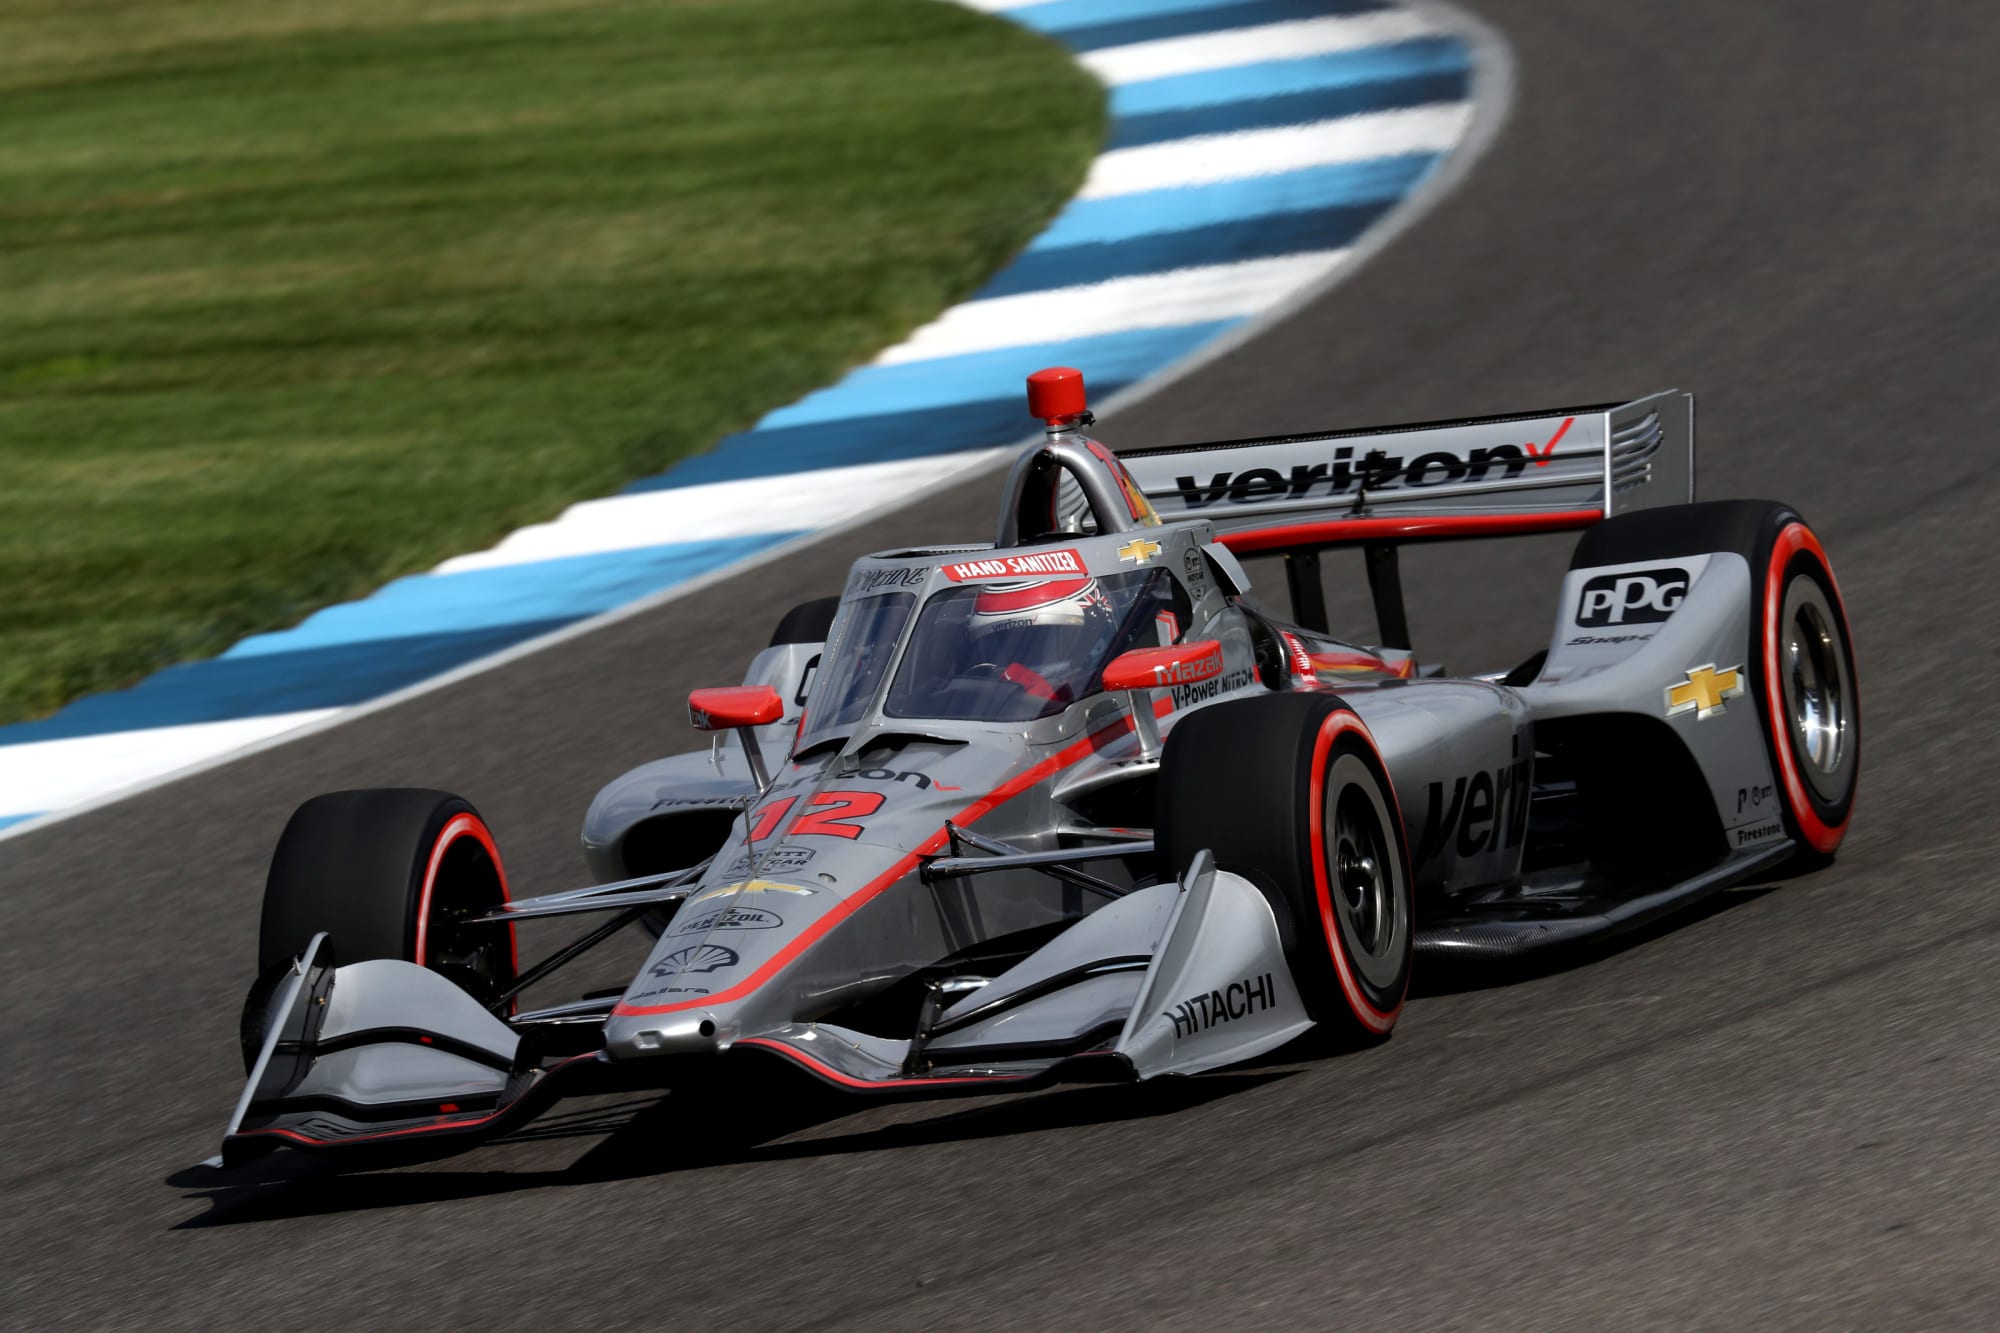 IndyCar: Indianapolis qualifying results - Will Power takes pole